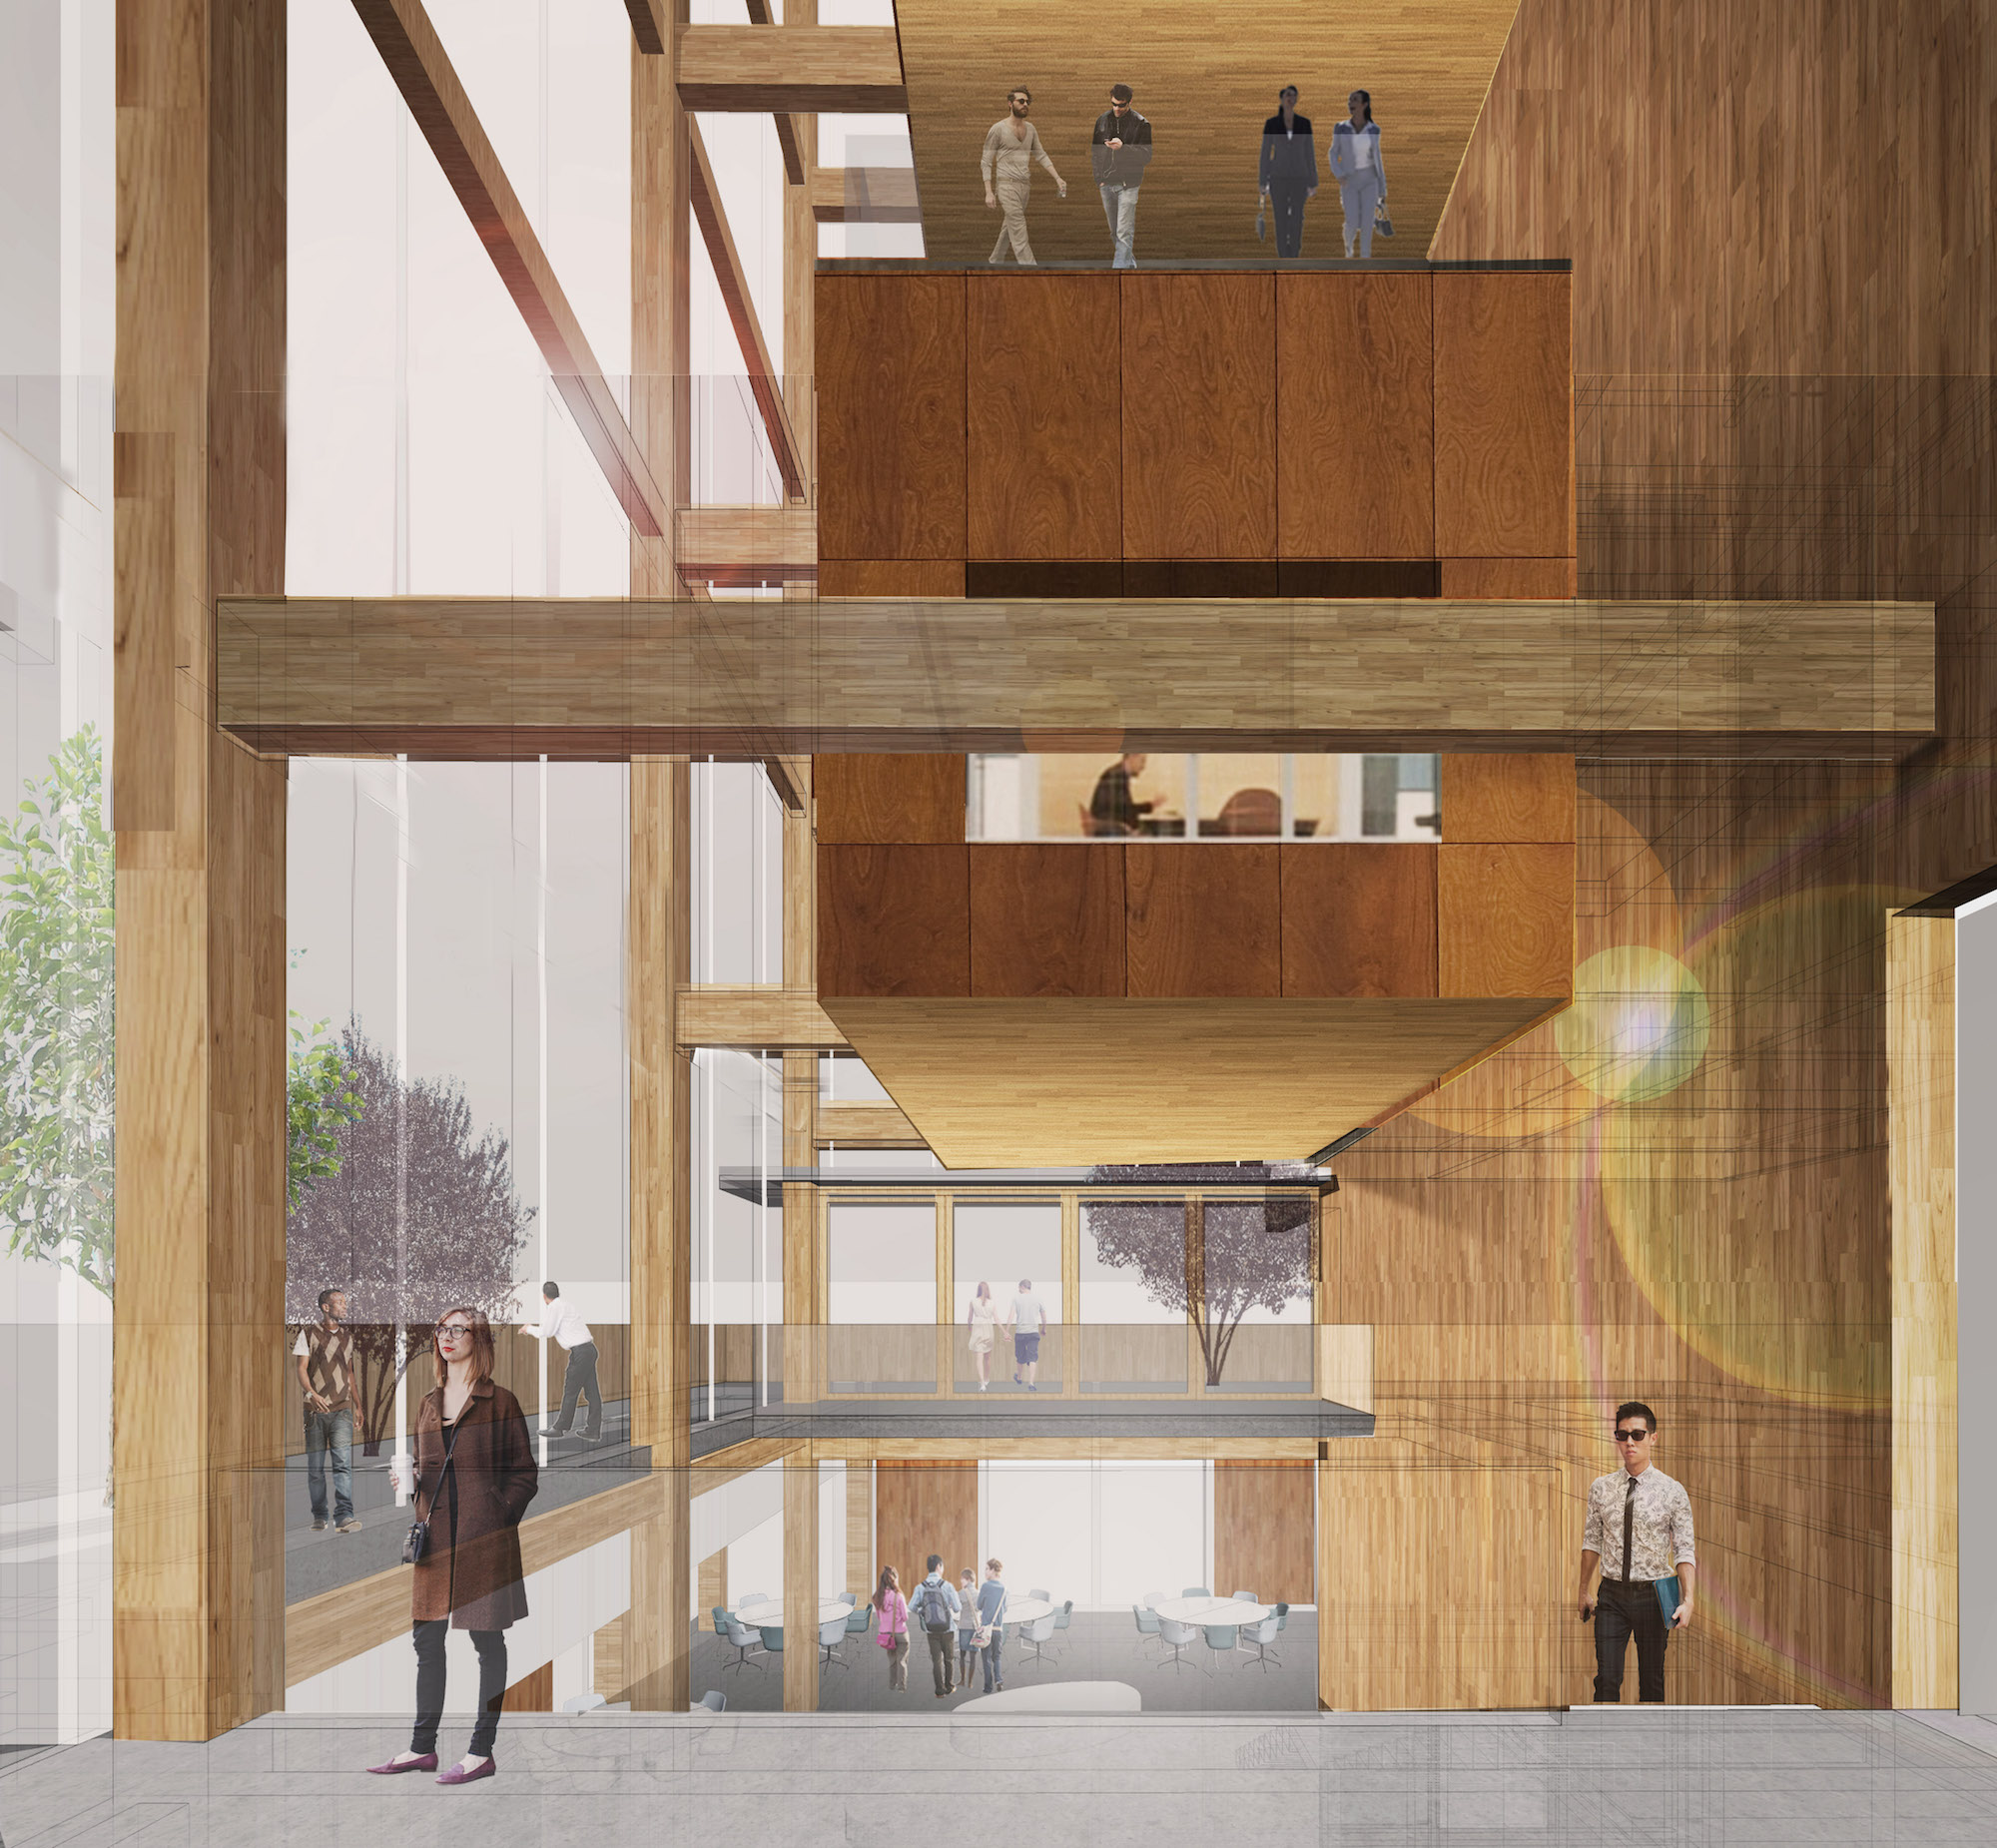 UW Center for Wood Innovation, rendering by Vy Nguyen